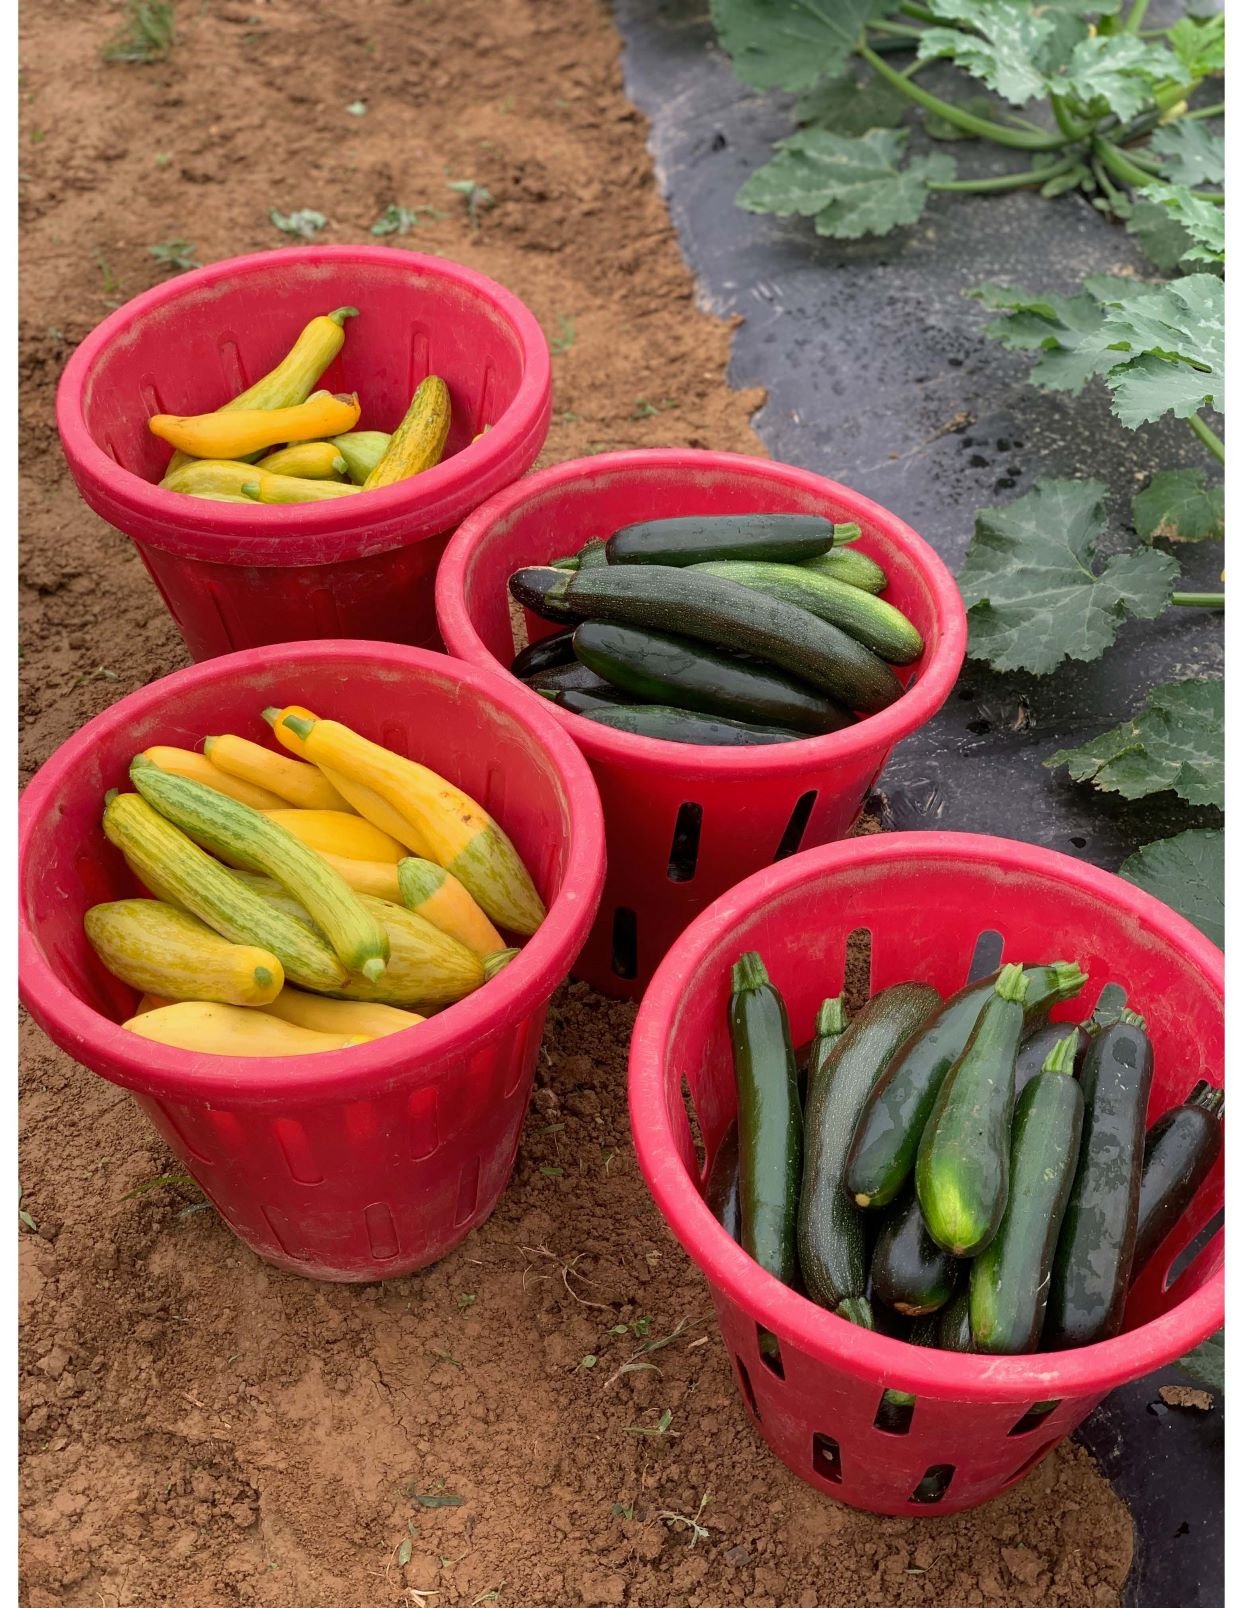 Next Happening: Friday CSA: Dickinson College Farm Field Notes for Week of June 24th